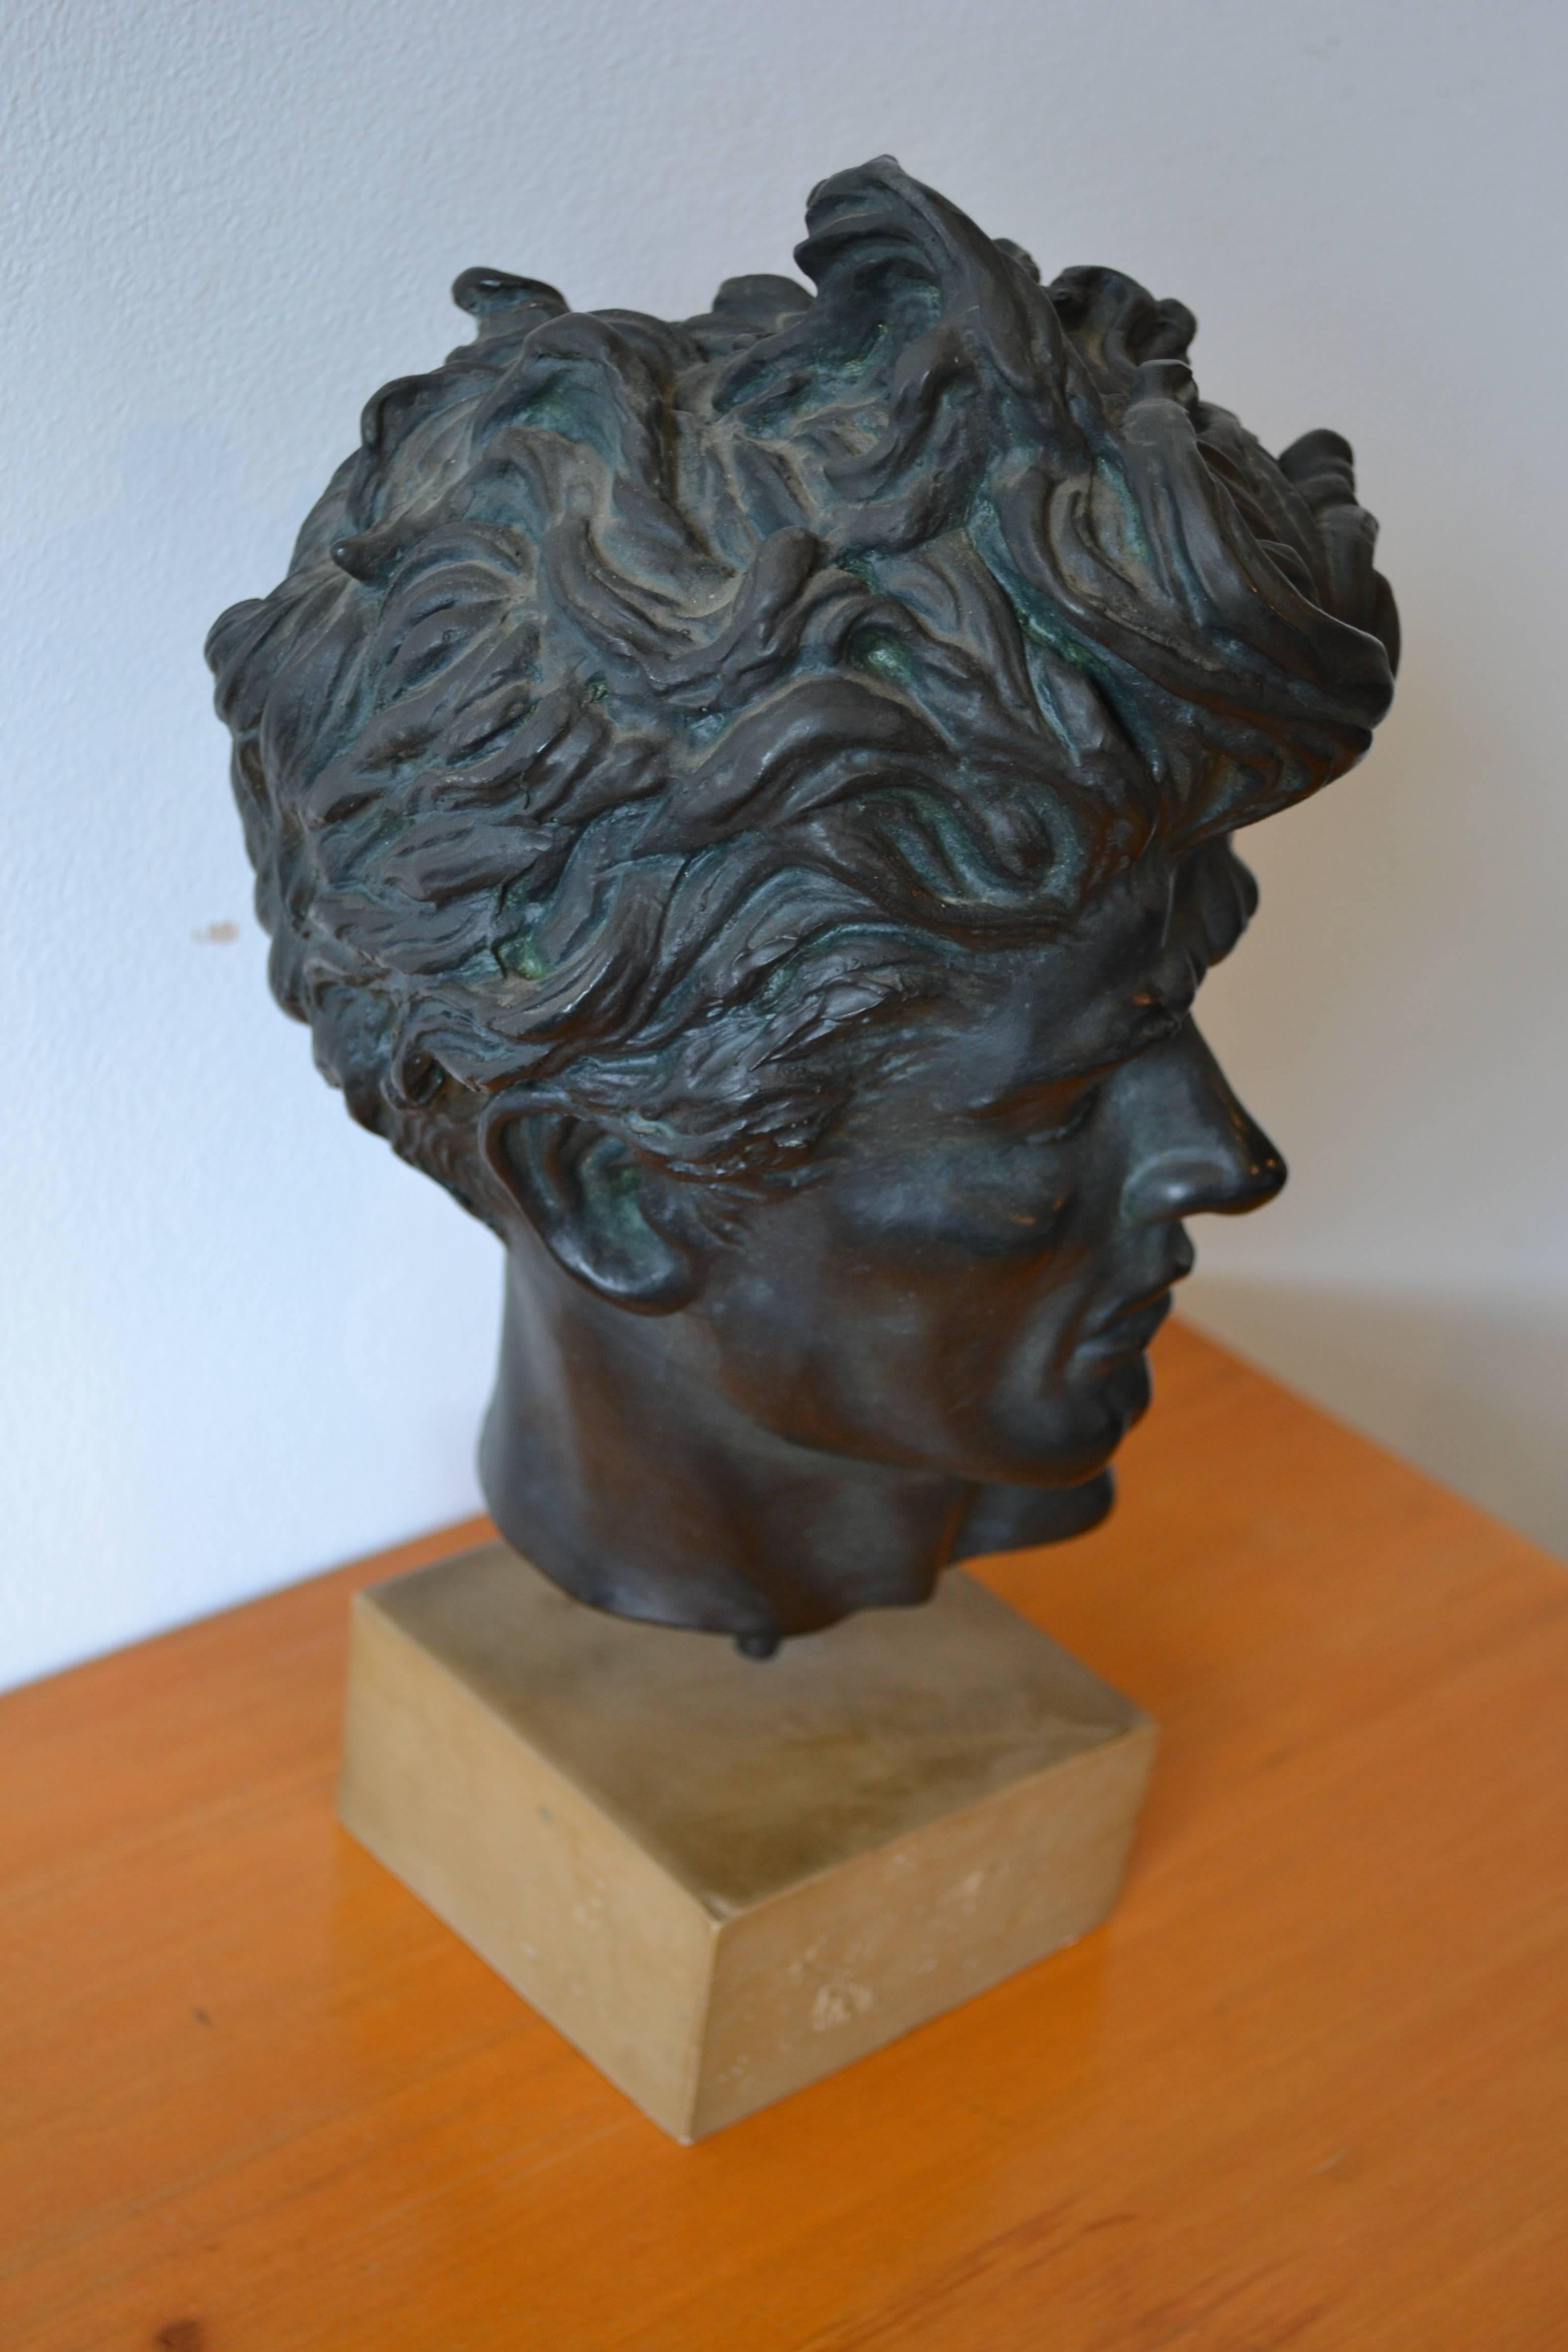 Mid-Century Modern male sculpture titled "Heroic Head" by Edward Melcarth, signed and dated. Made of black resin. Great modern period piece. Great size for table top or book shelf. 10 inches x 7 inches x 7 inches